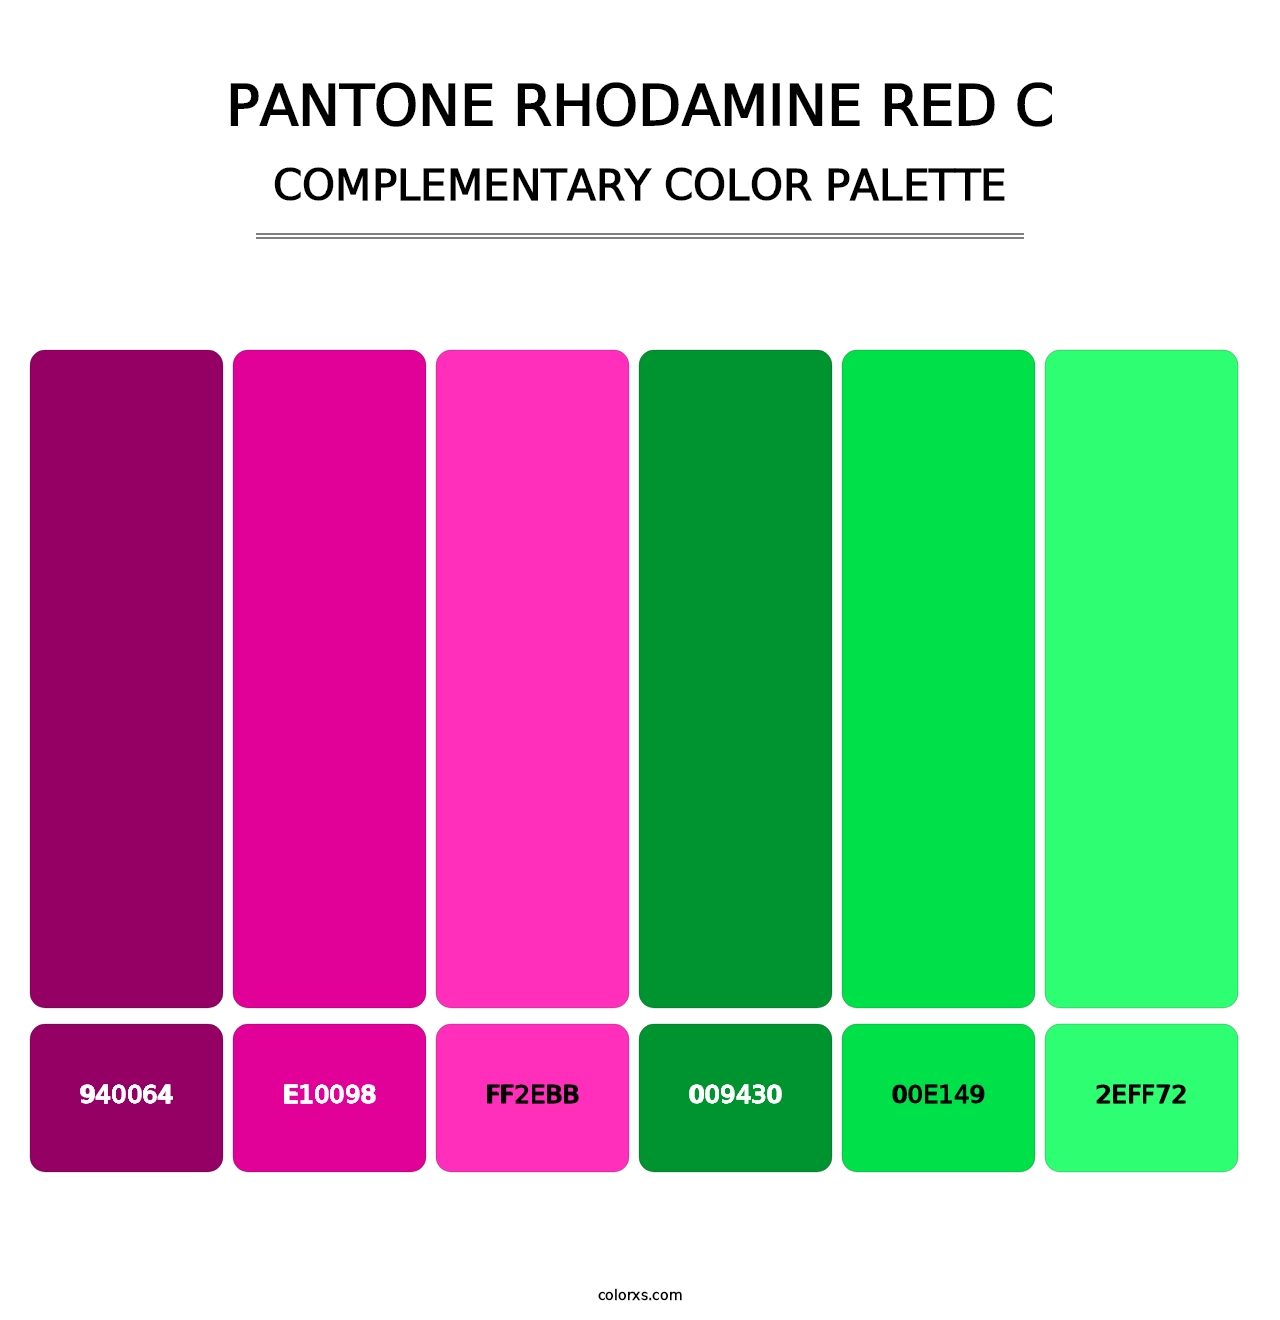 PANTONE Rhodamine Red C - Complementary Color Palette